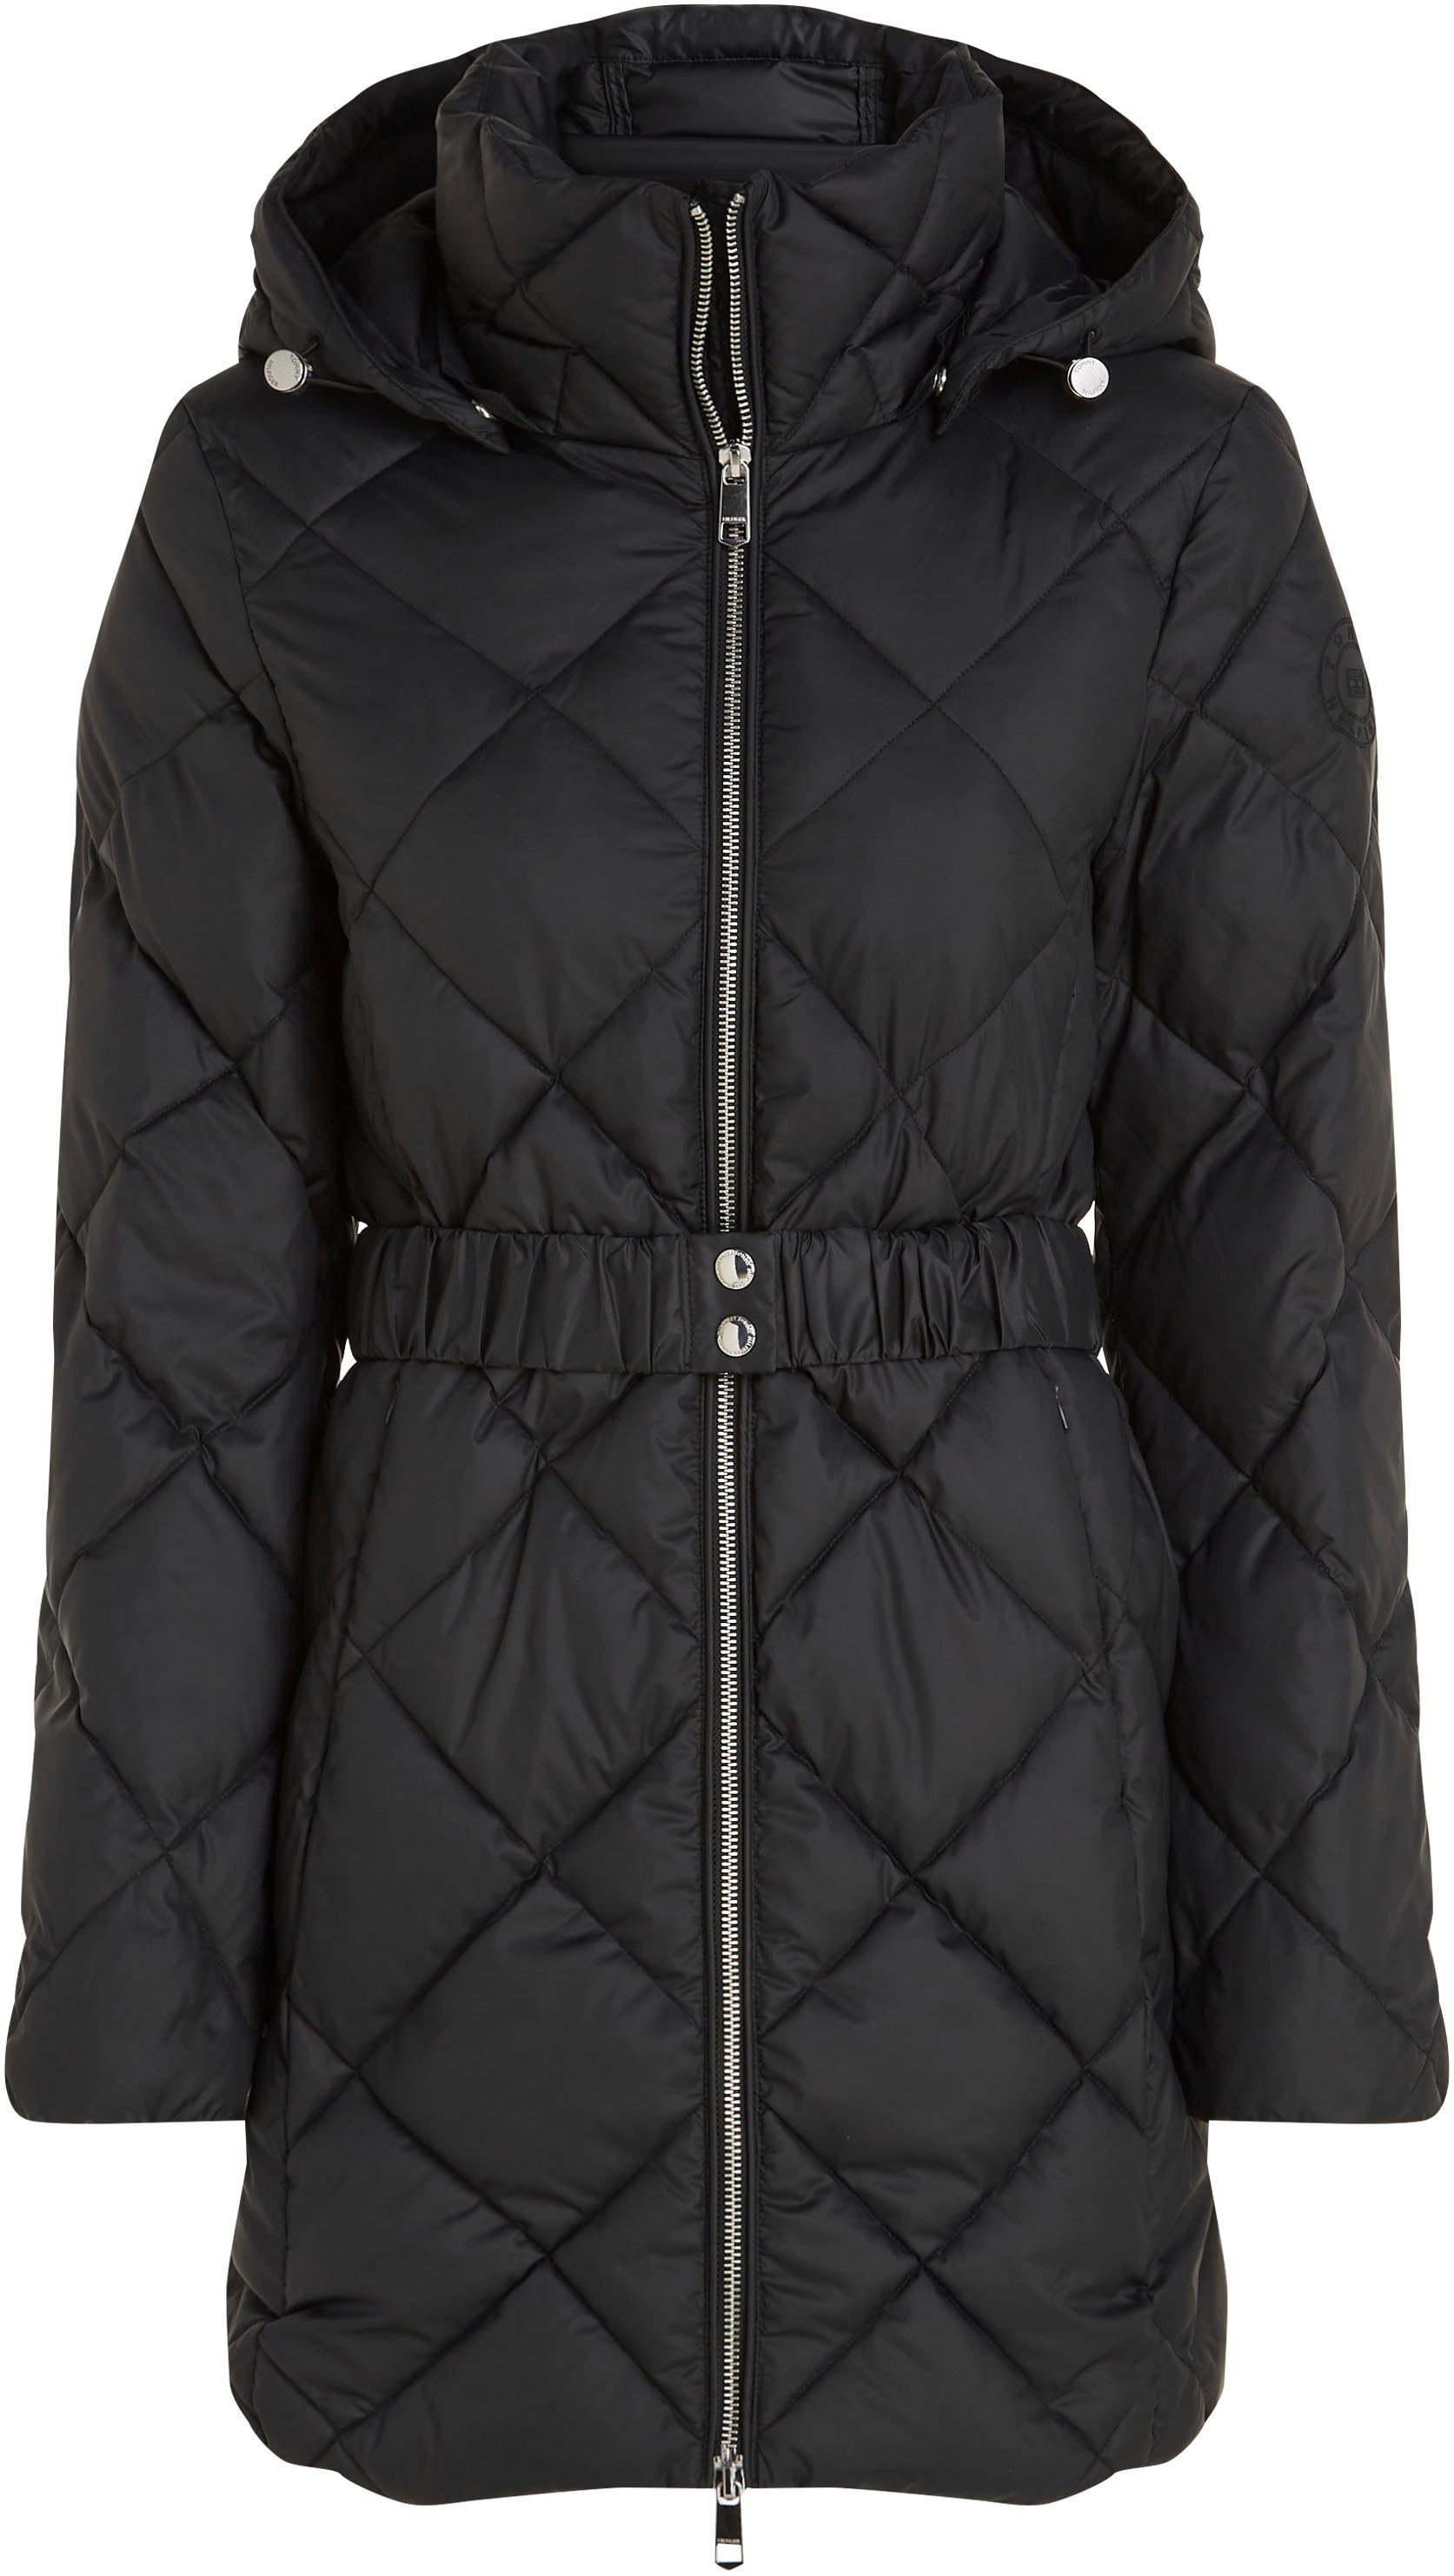 Tommy Hilfiger abnehmbarer BELTED ELEVATED Steppmantel mit COAT QUILTED Kapuze